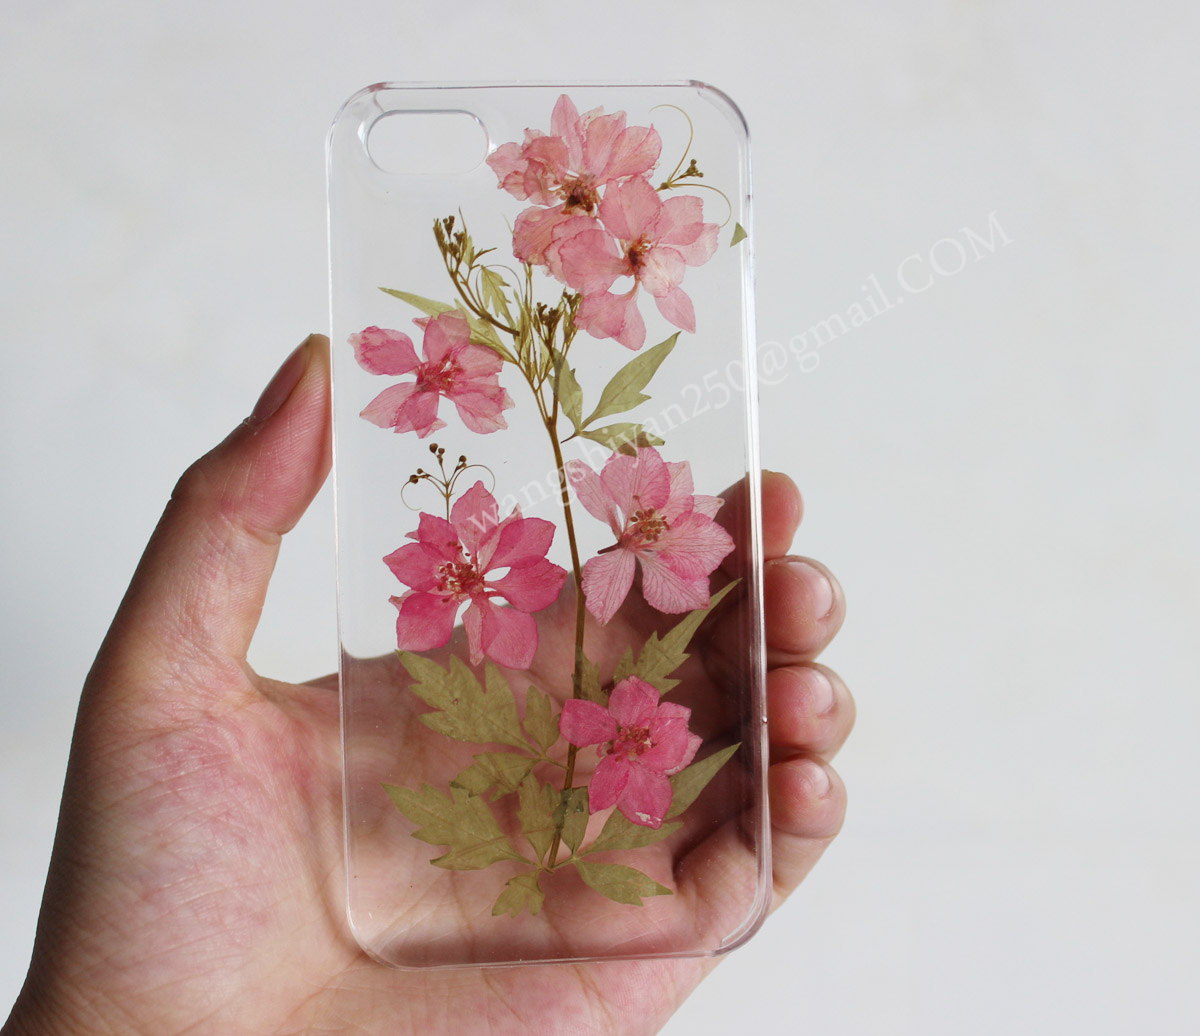 Iphone 6 Case,pressed Flower Phone Case,iphone 6 Plus Case,real Flowers Case,iphone 5 Case,iphone 5s Case,iphone 5c Case,for Samsung Galaxy S3 S4